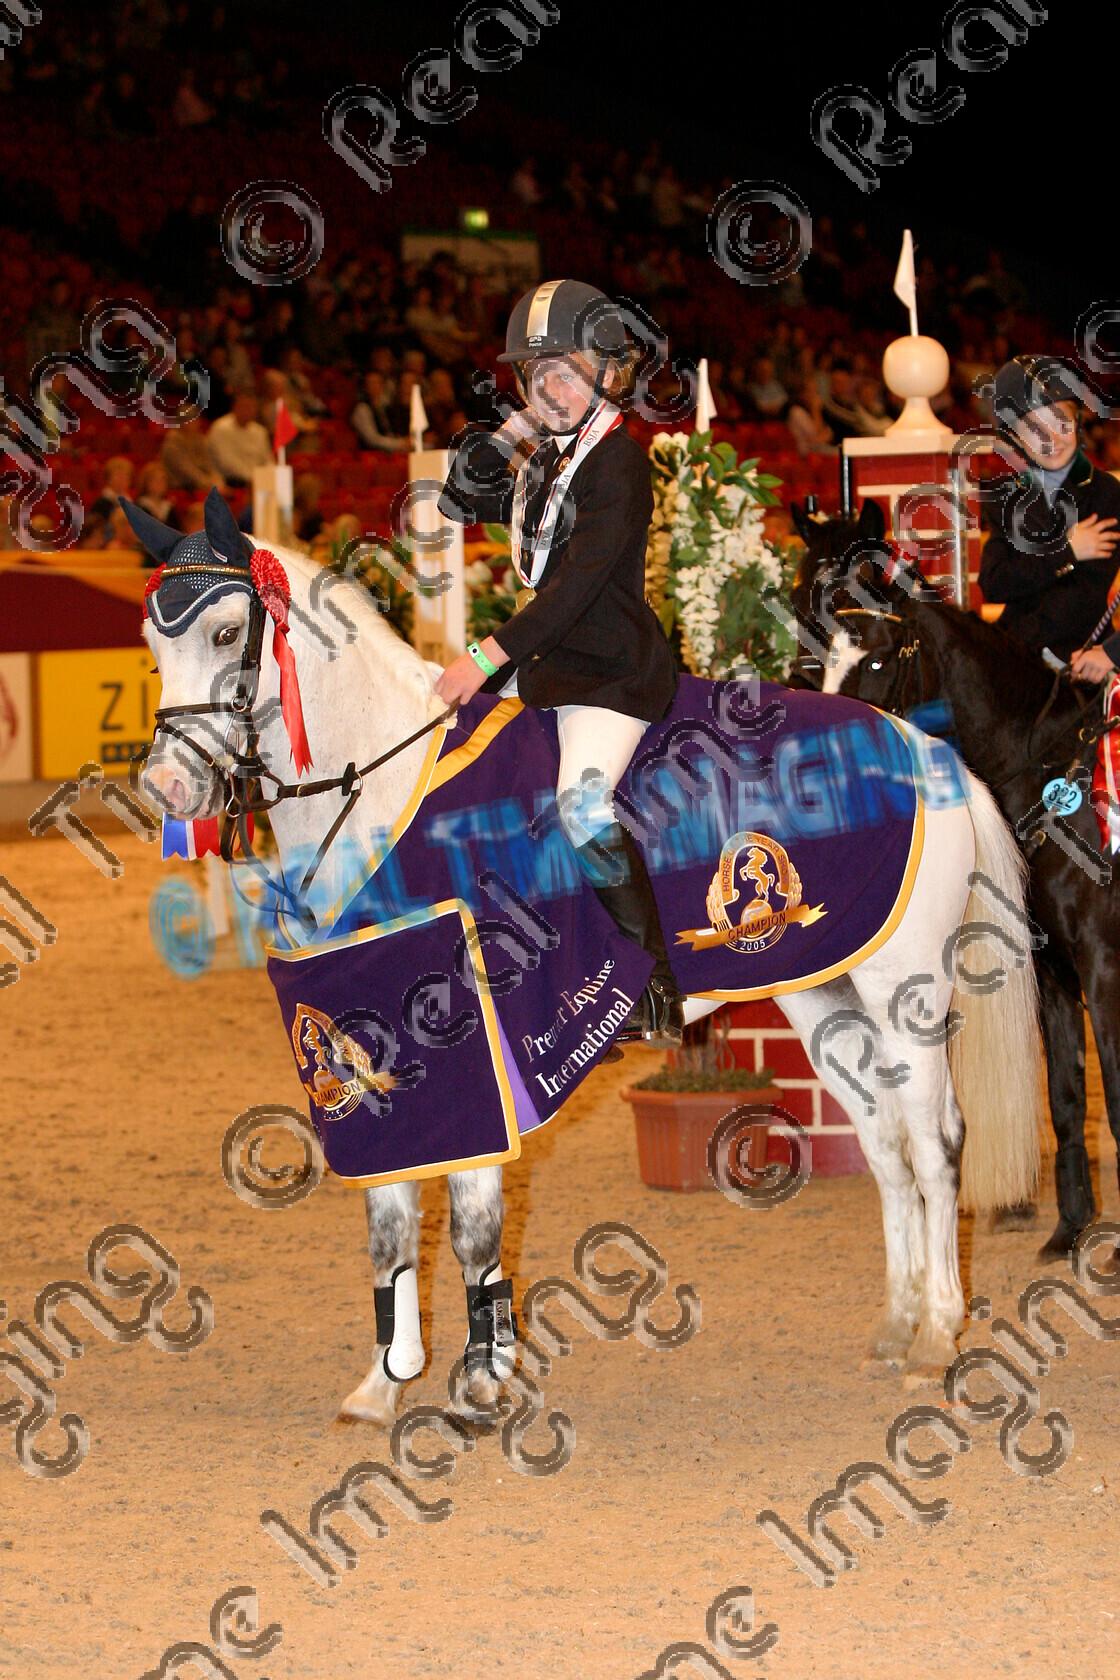 S05-67-M2-088 
 HOYS 2005: HOYS 128cms Champion 
 Keywords: horse of the year show 2005 05 hoys saturday 15 10 october showjumping showjumper 10 128cms Champion 321 Silver Wonder Pippa Allen grey gray standing presentation rug trophy rosette